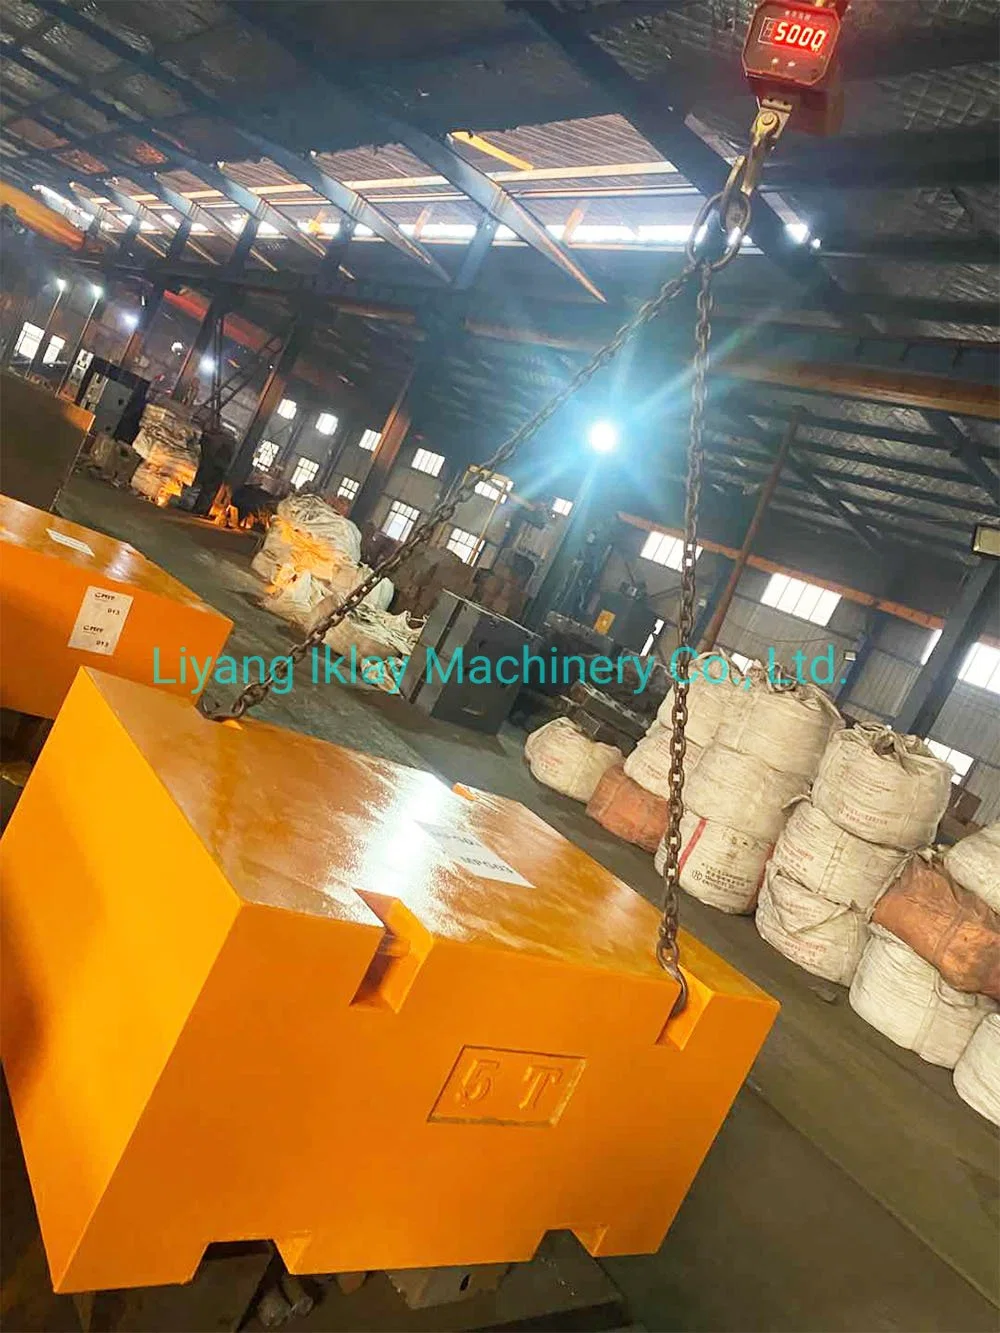 Load Testing Weights 1 Ton Test Weights for Truck Scales 500kg Roller Weights for Floor Scales 20kg 25kg 200kg Instrument Measuring Weight